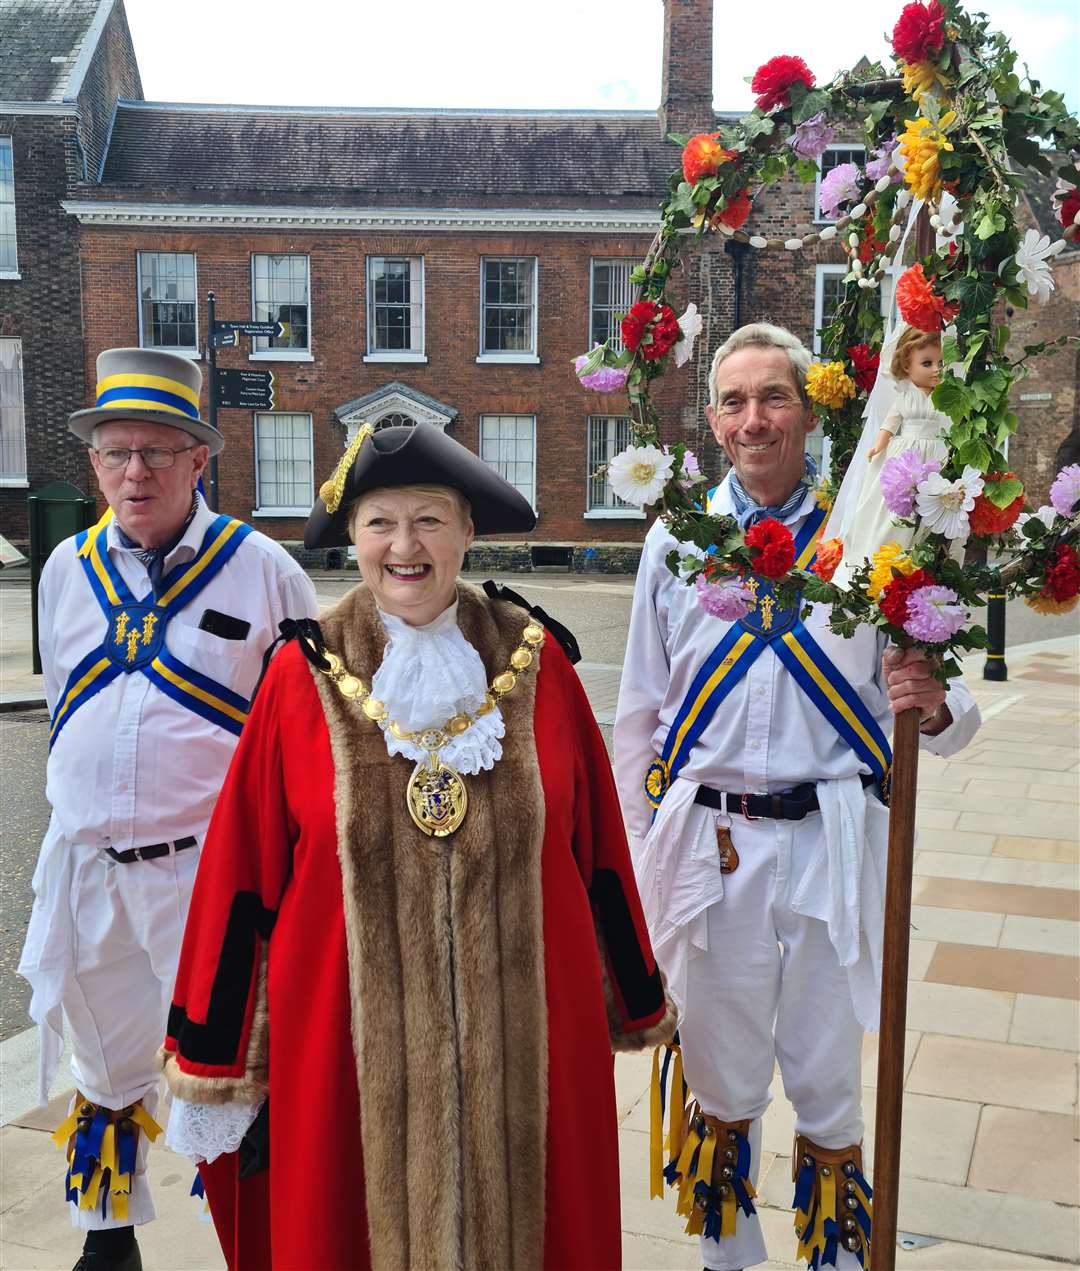 King's Morris's May Day celebrations in King's Lynn, with West Norfolk mayor Lesley Bambridge